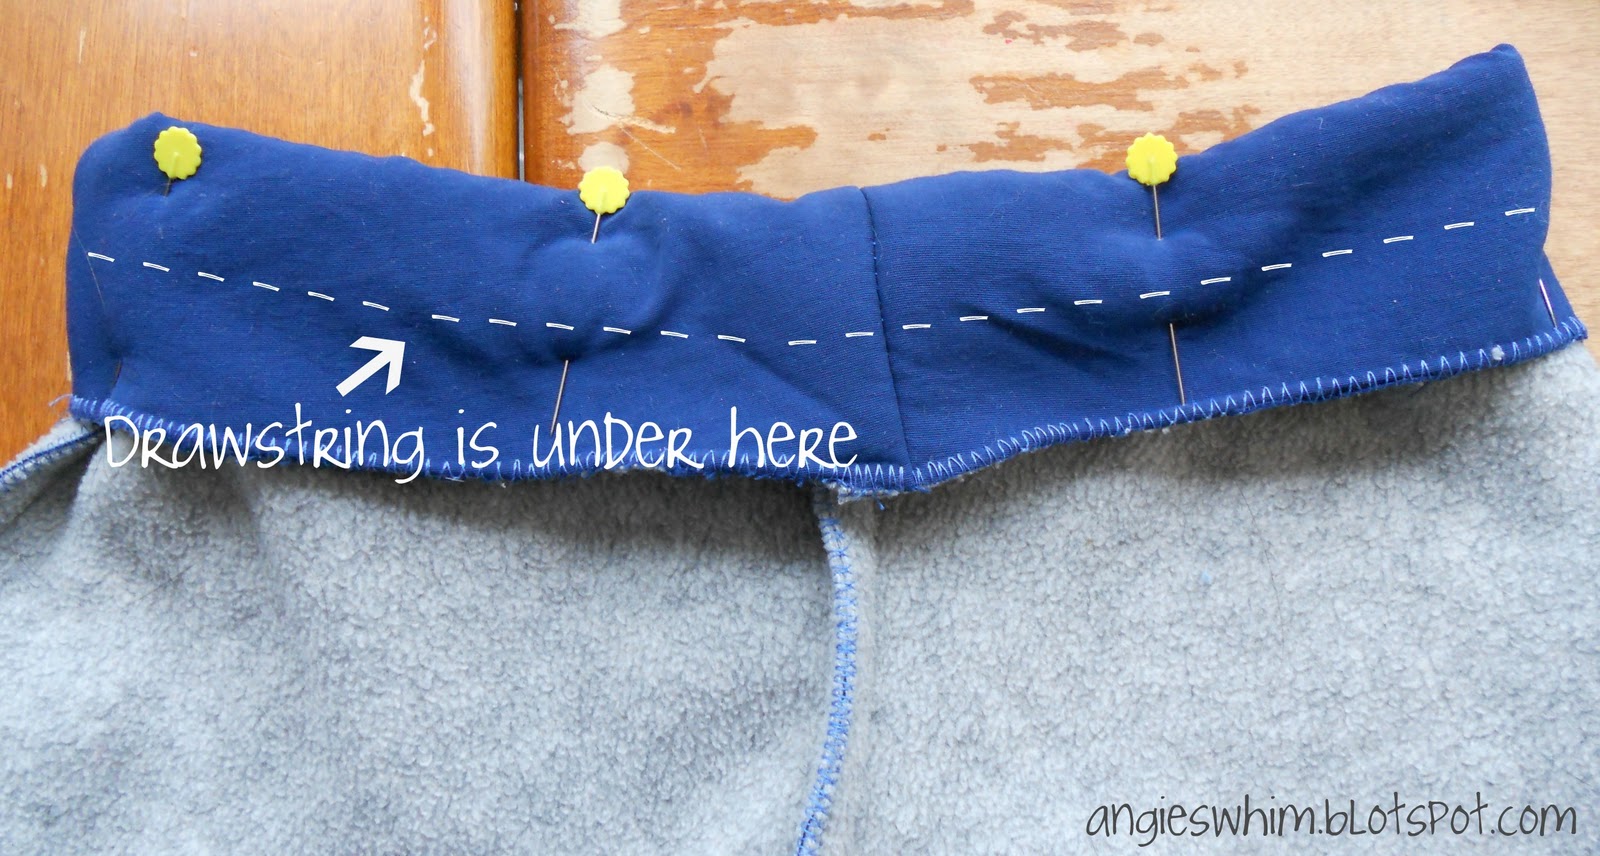 Angie's Whim: The Snow Pant Refashion Tutorial